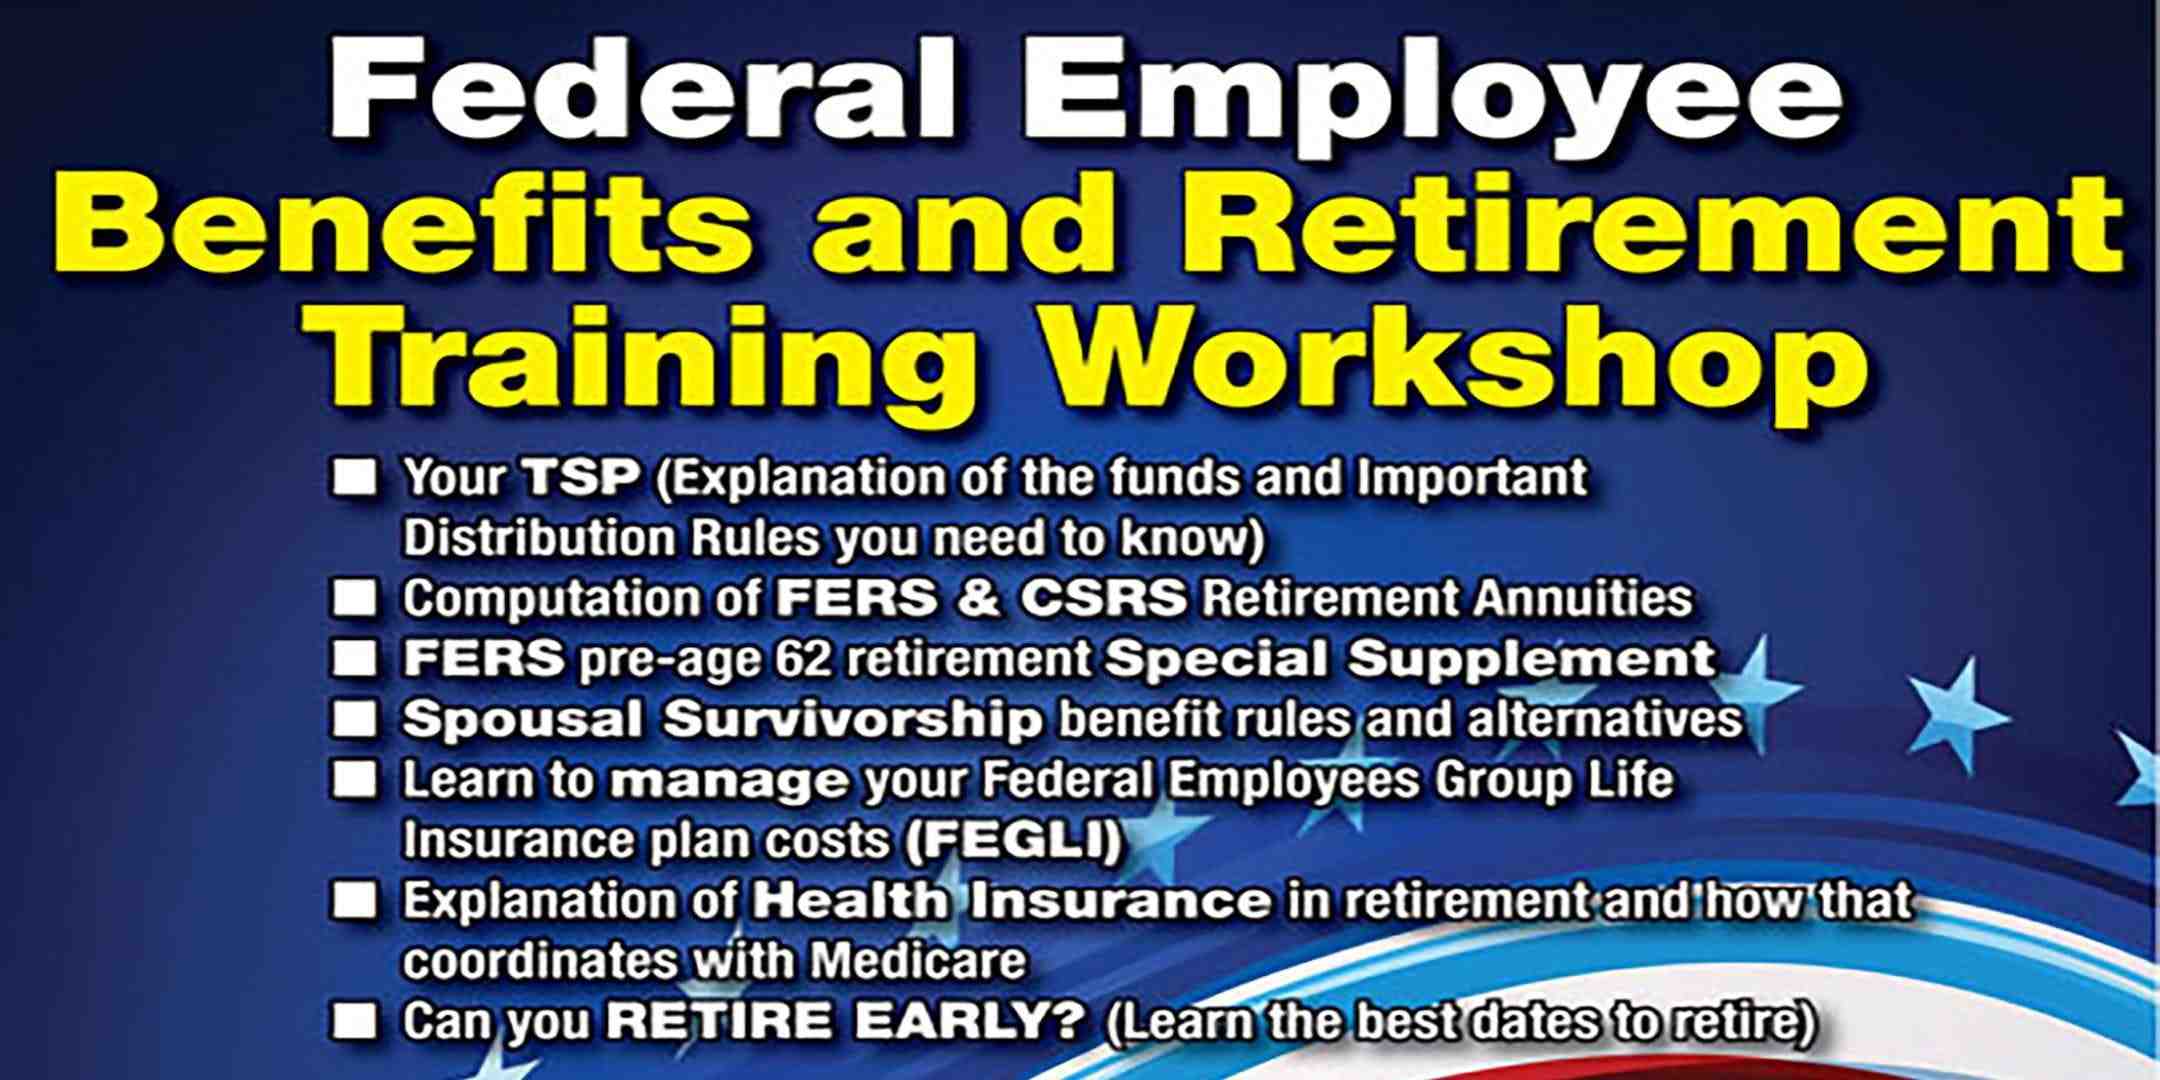 Can I retire after 5 years of federal service?